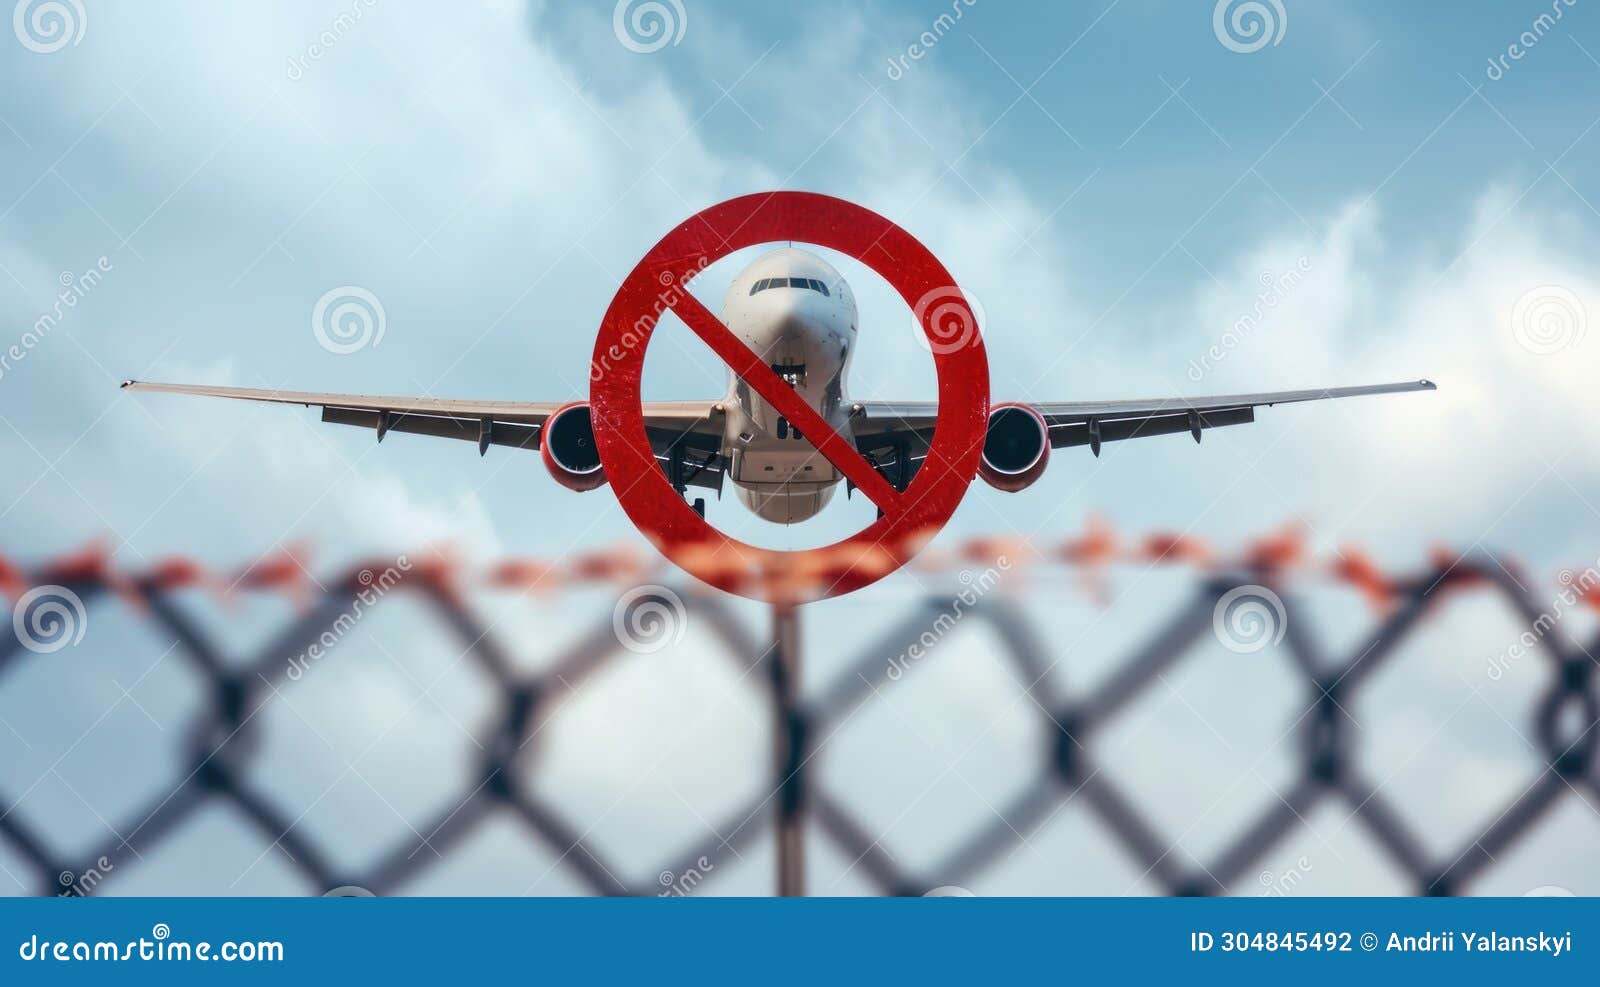 prohibition of an aircraft from entering airspace. denial to enter air area. cancel insurance. no fly zone, transit prohibition.